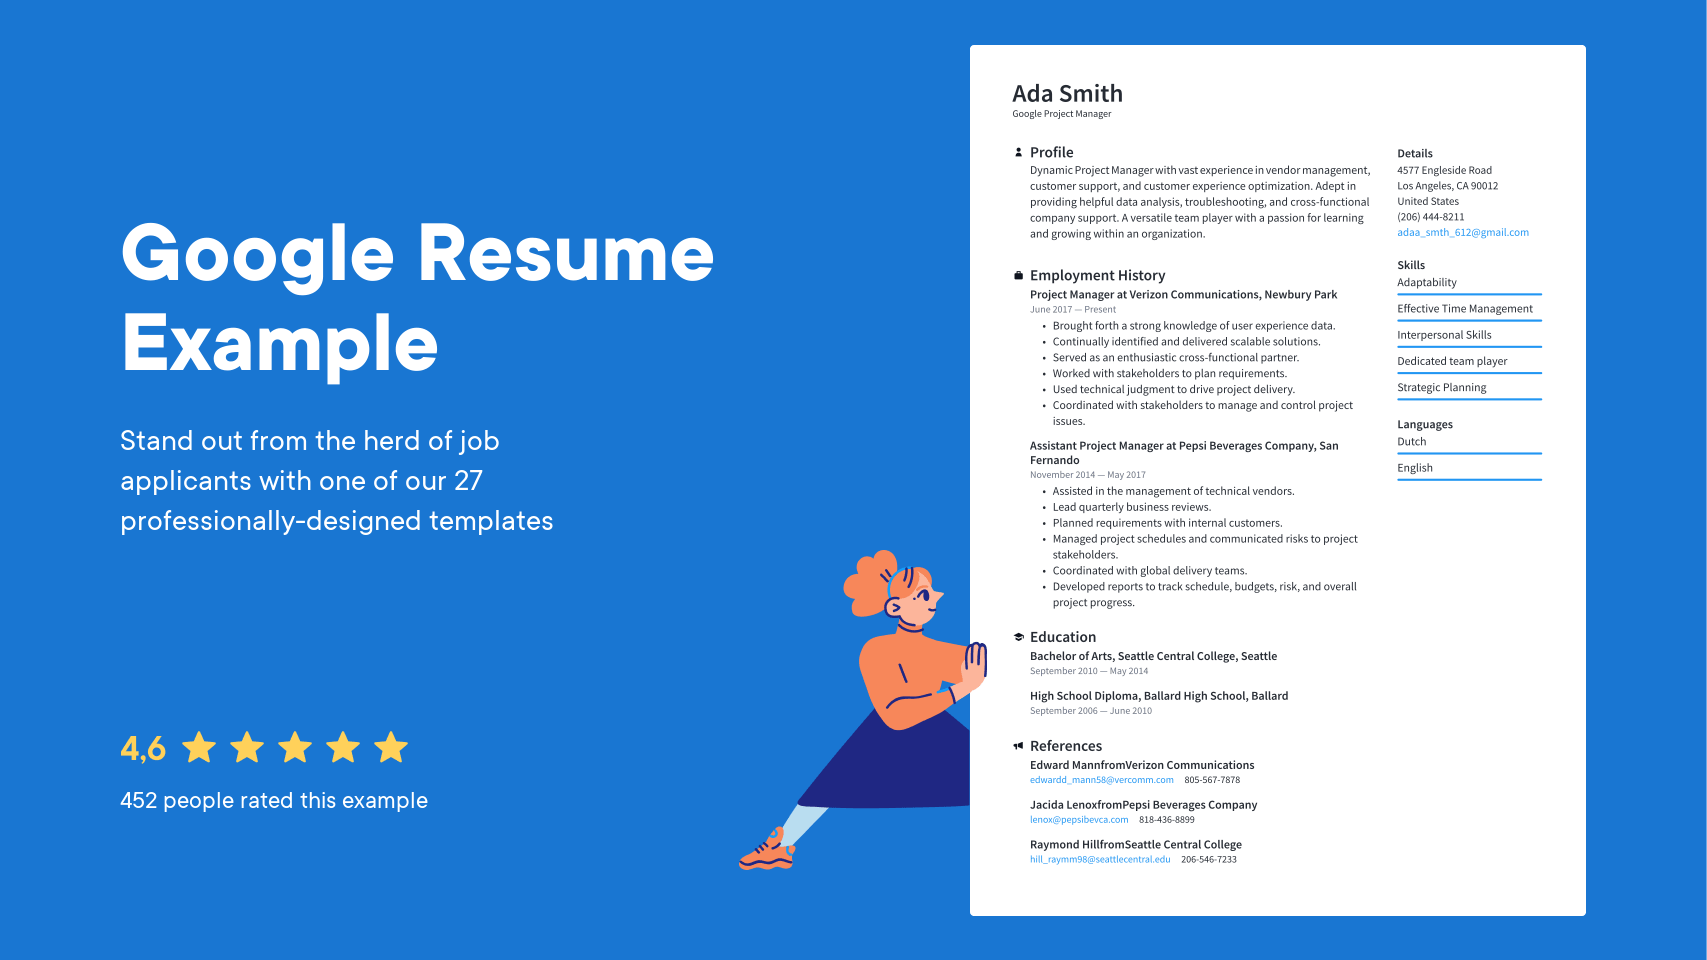 How To Write Effective Resumes